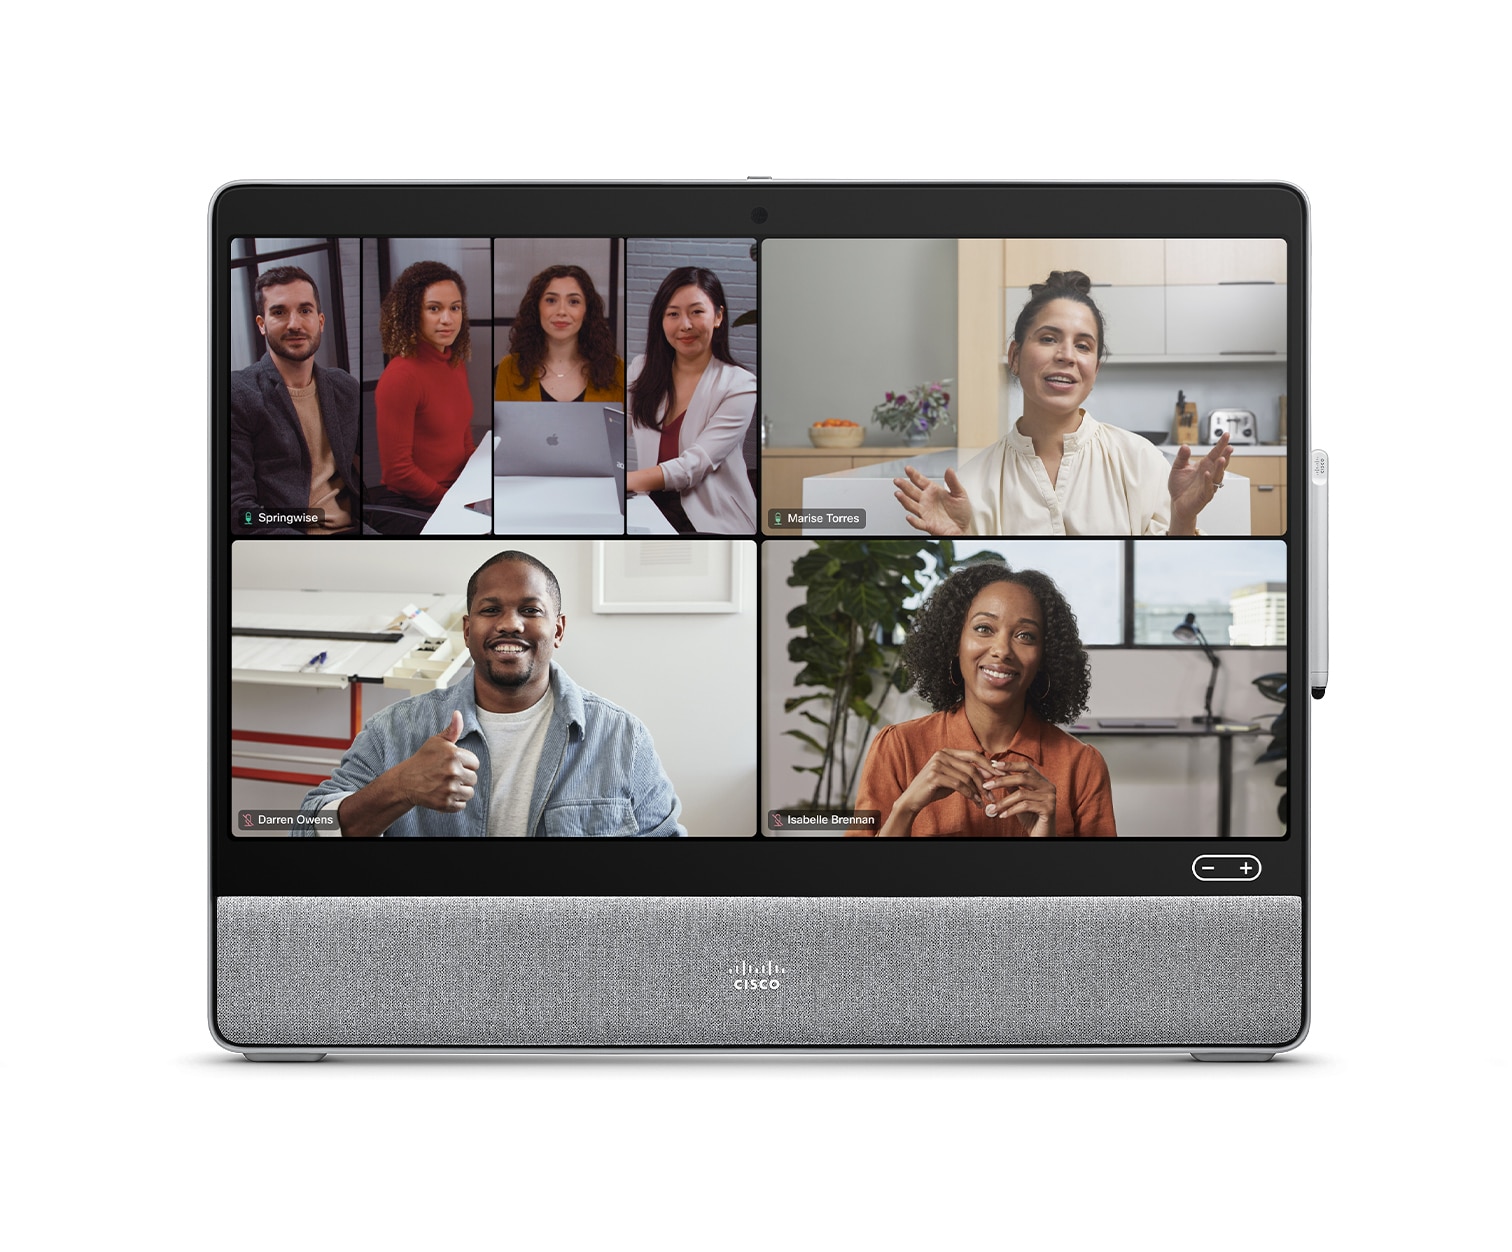 Frames view on Cisco Desk device with Third-party meeting platform and 4 people selected for video conference.